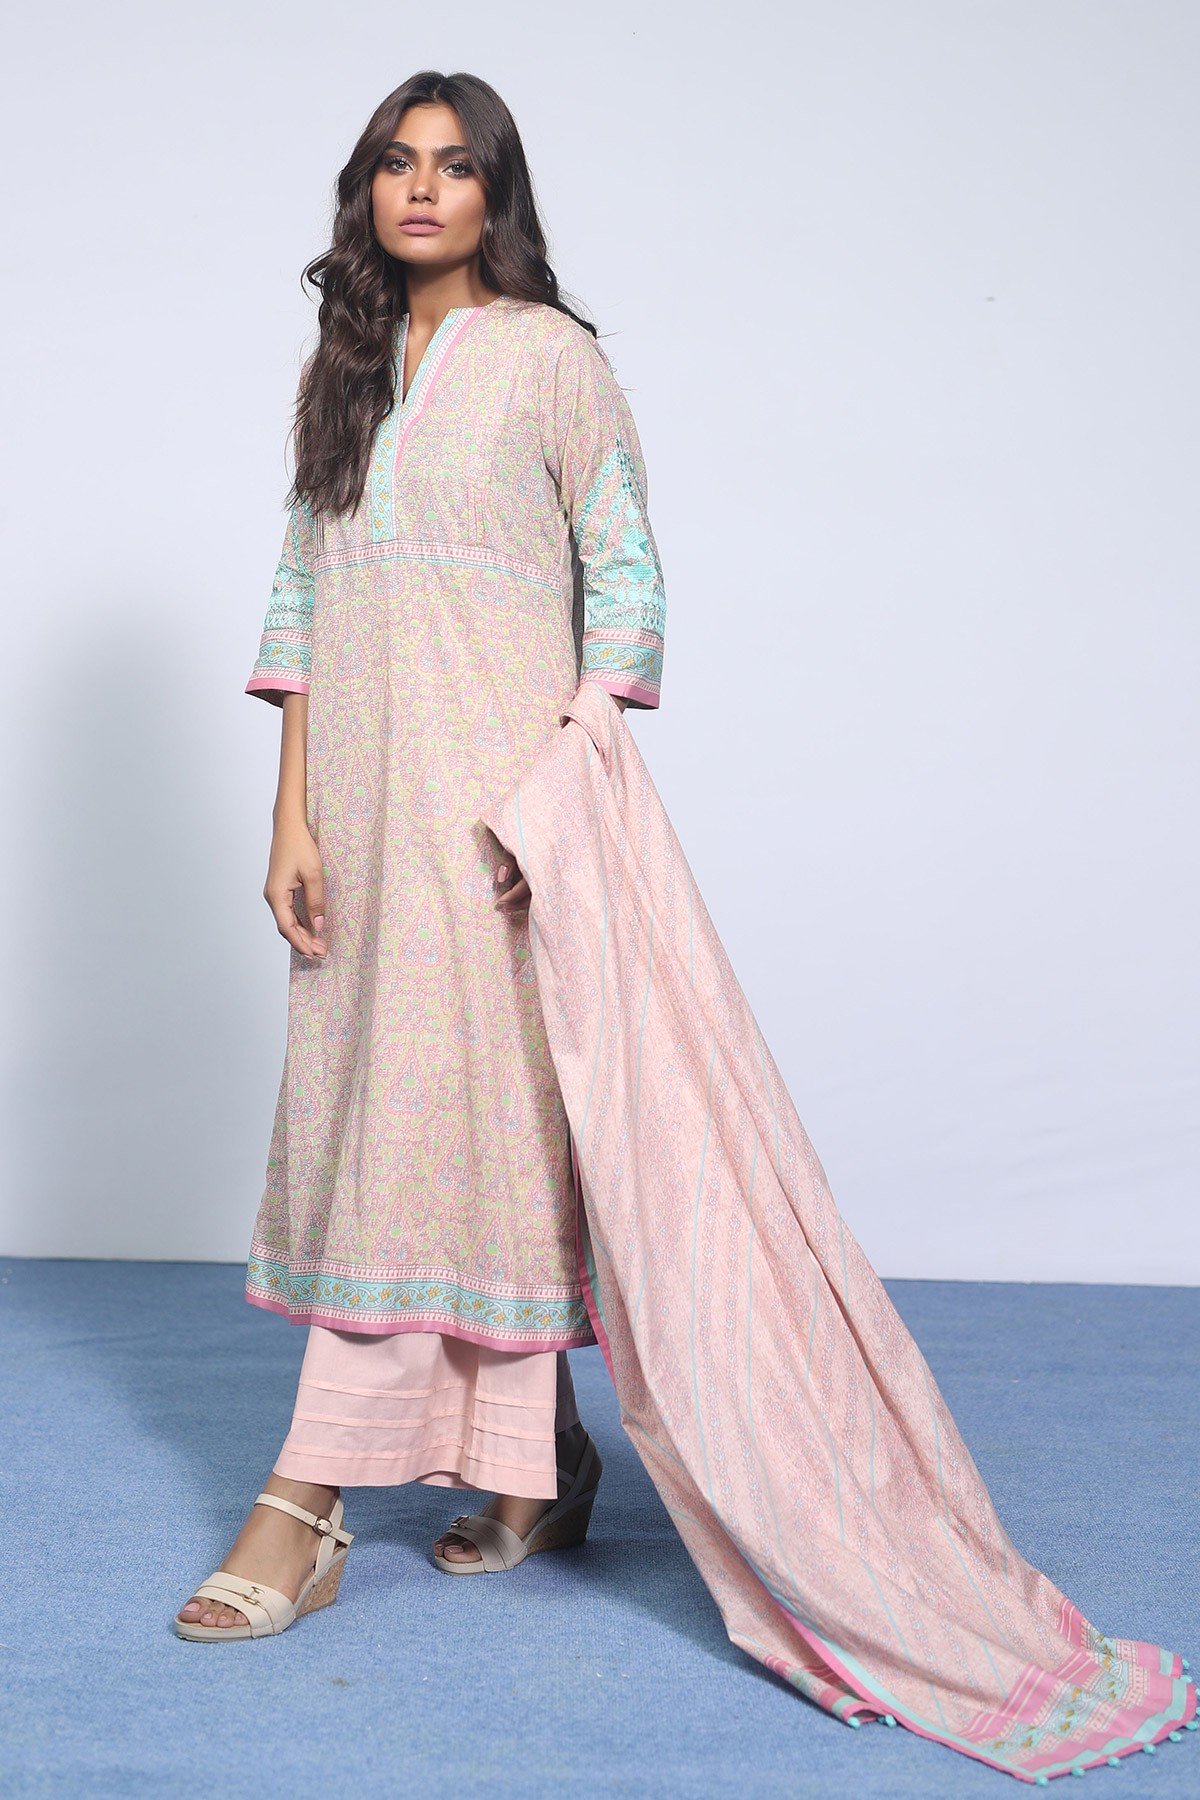 /2019/06/alkaram-studio-spring-summer-collection-3-piece-embroidered-suit-with-lawn-dupatta-ss-51-19-2-pink-image1.jpeg